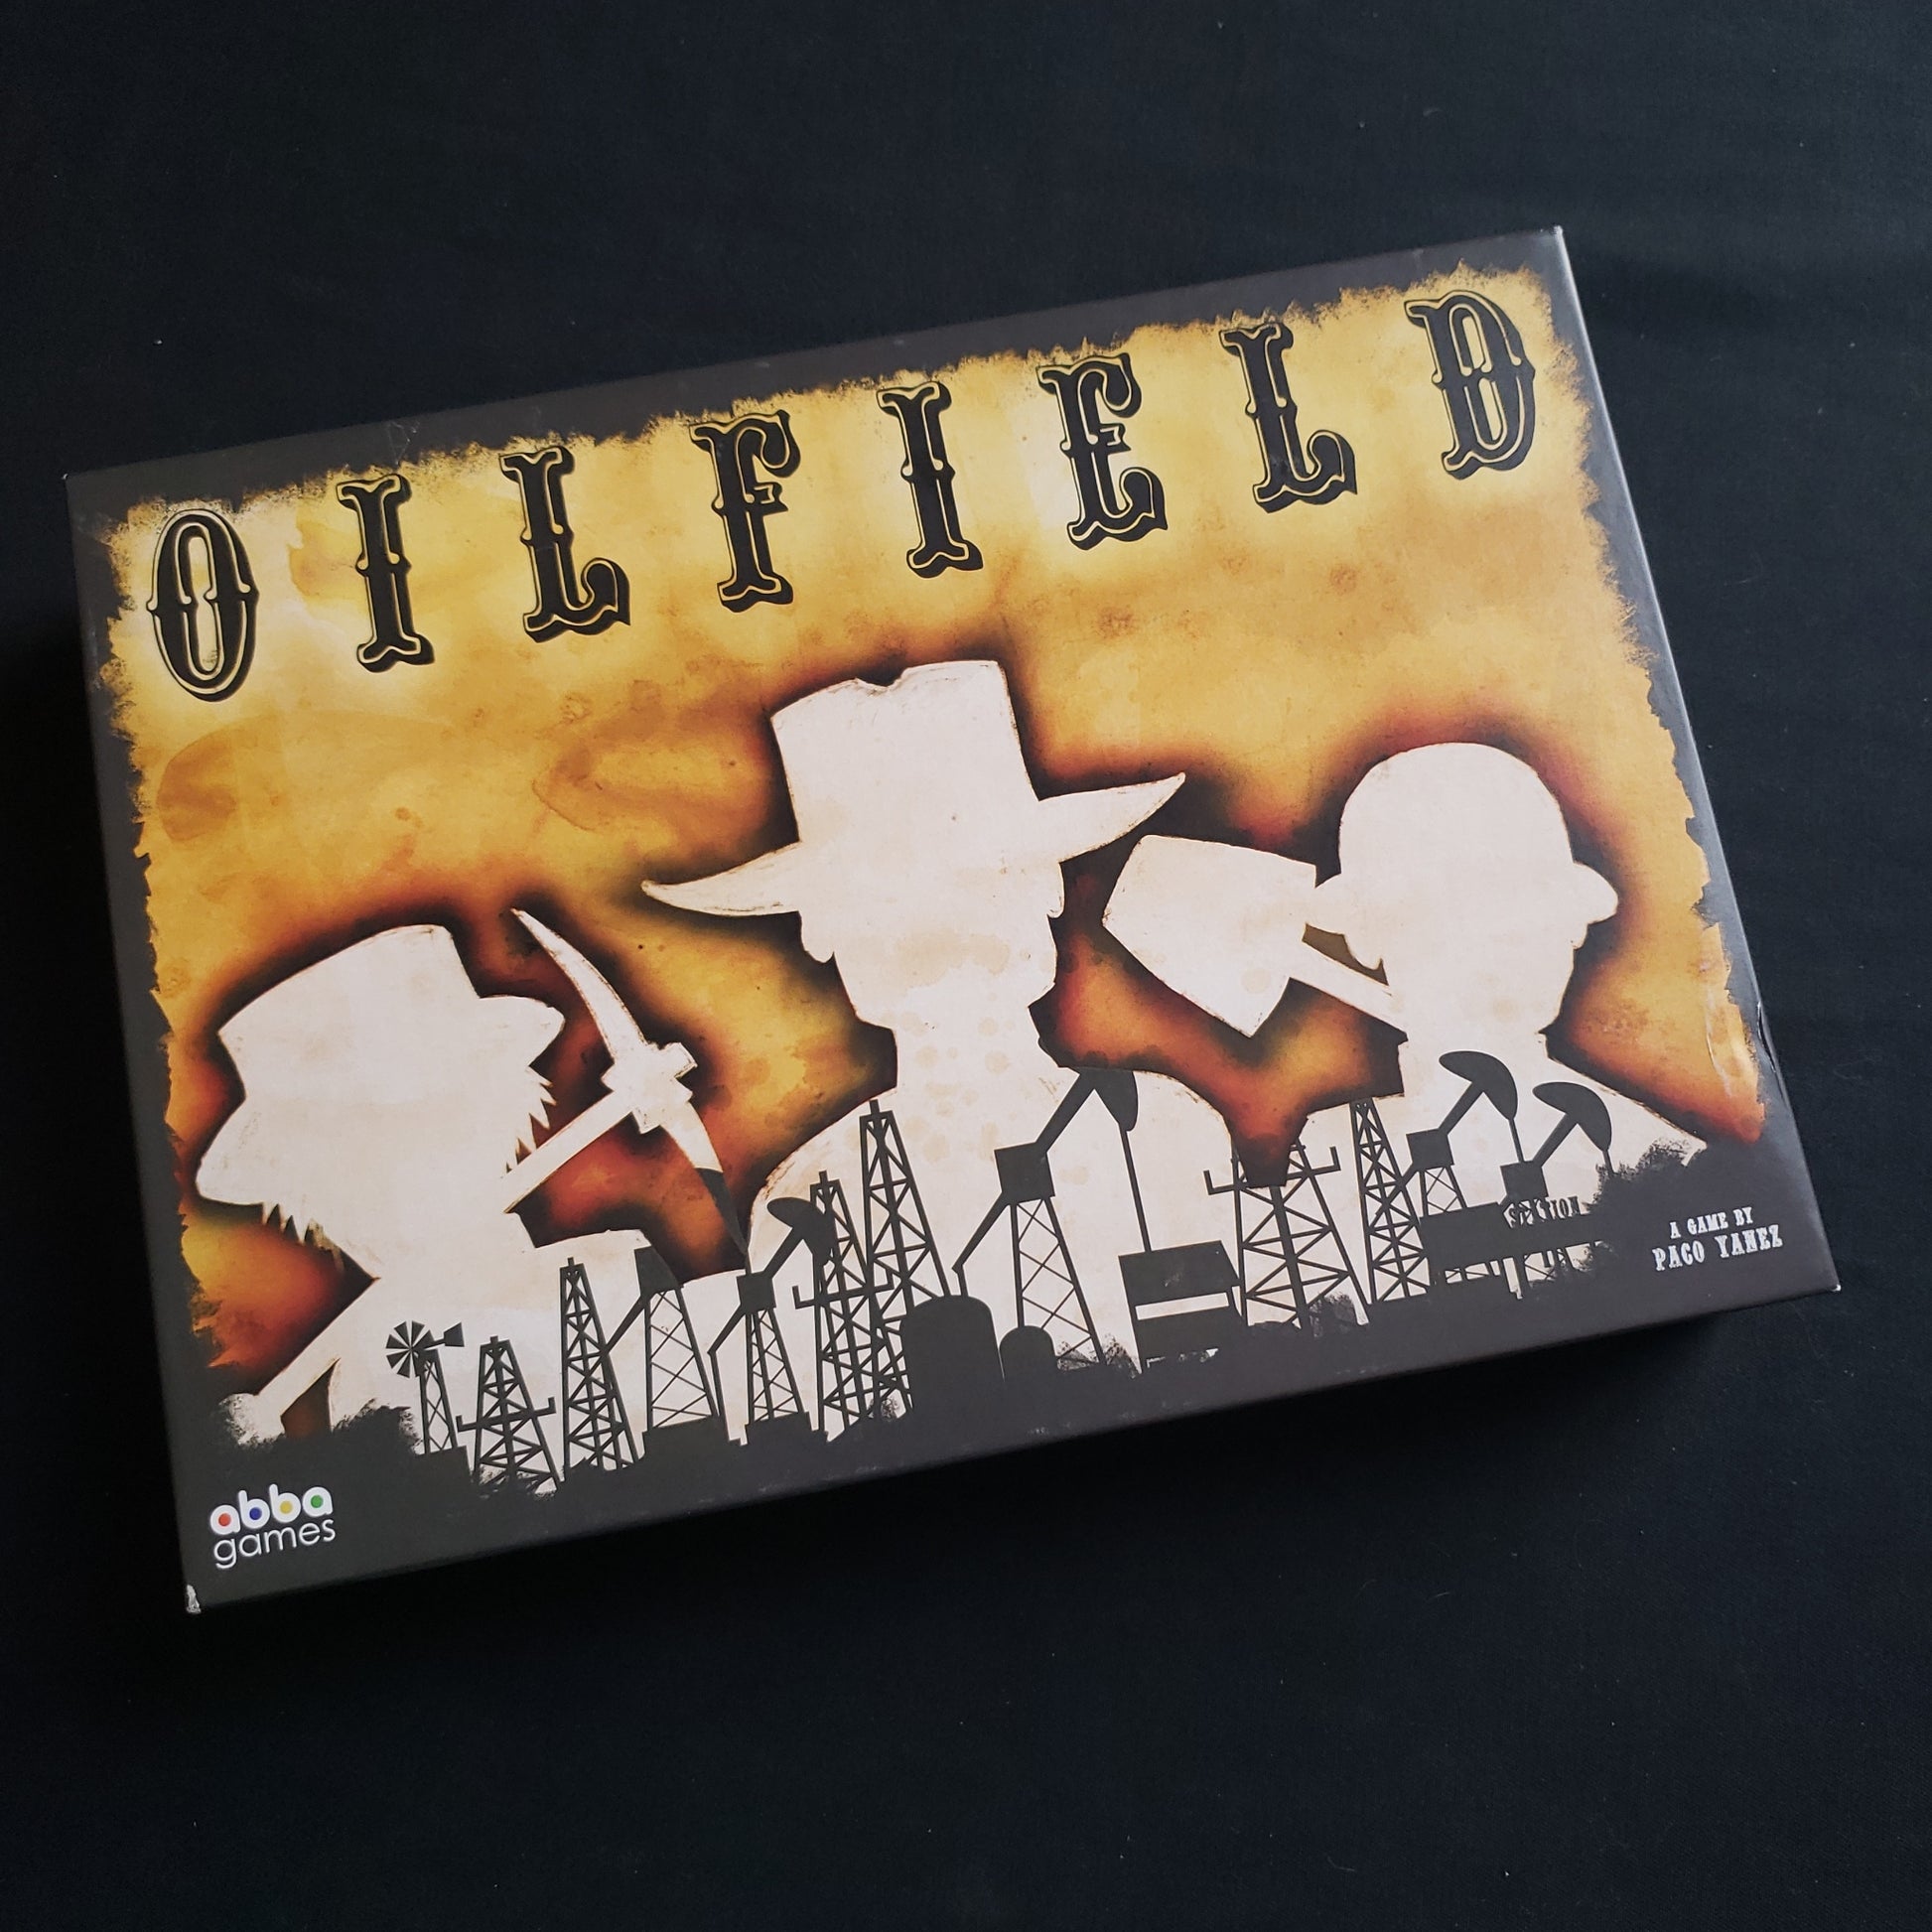 Image shows the front cover of the box of the Oilfield board game